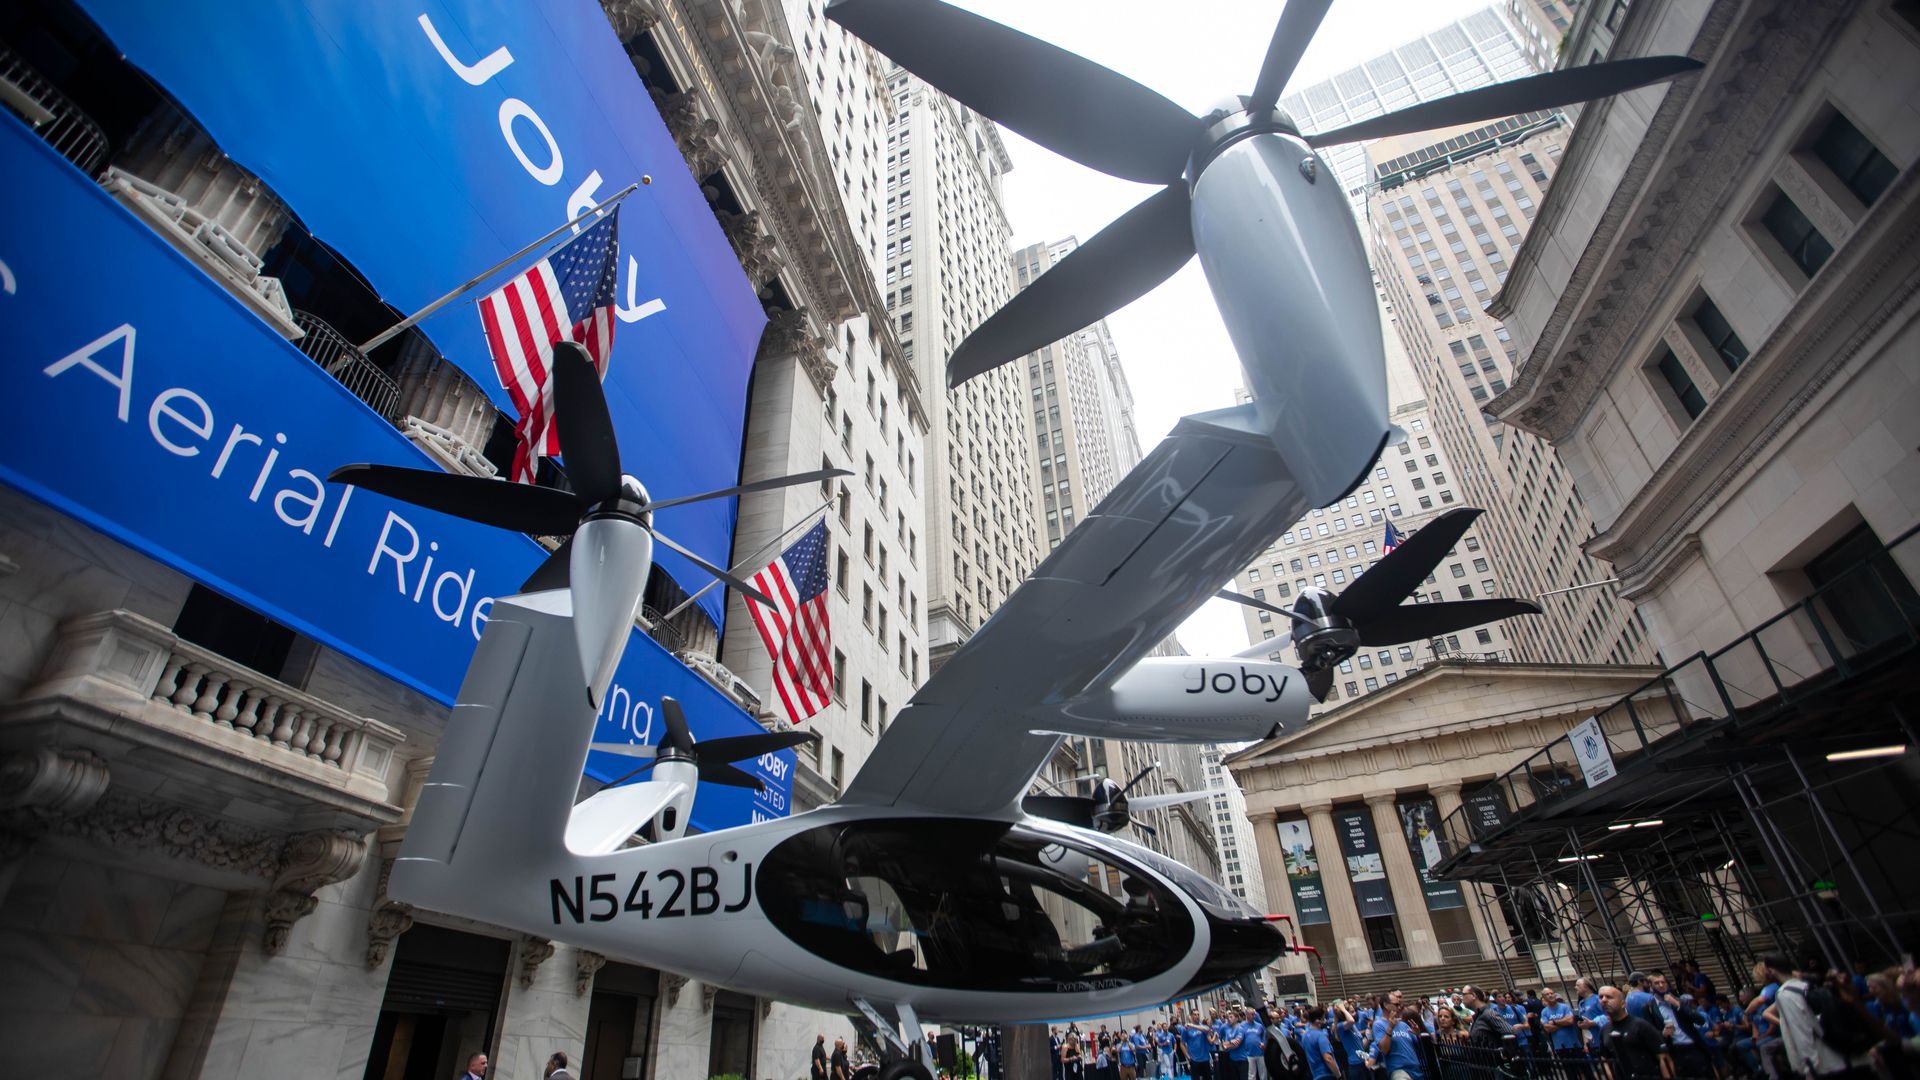 Joby Aviation aircraft sitting outside the New York Stock Exchange in August.